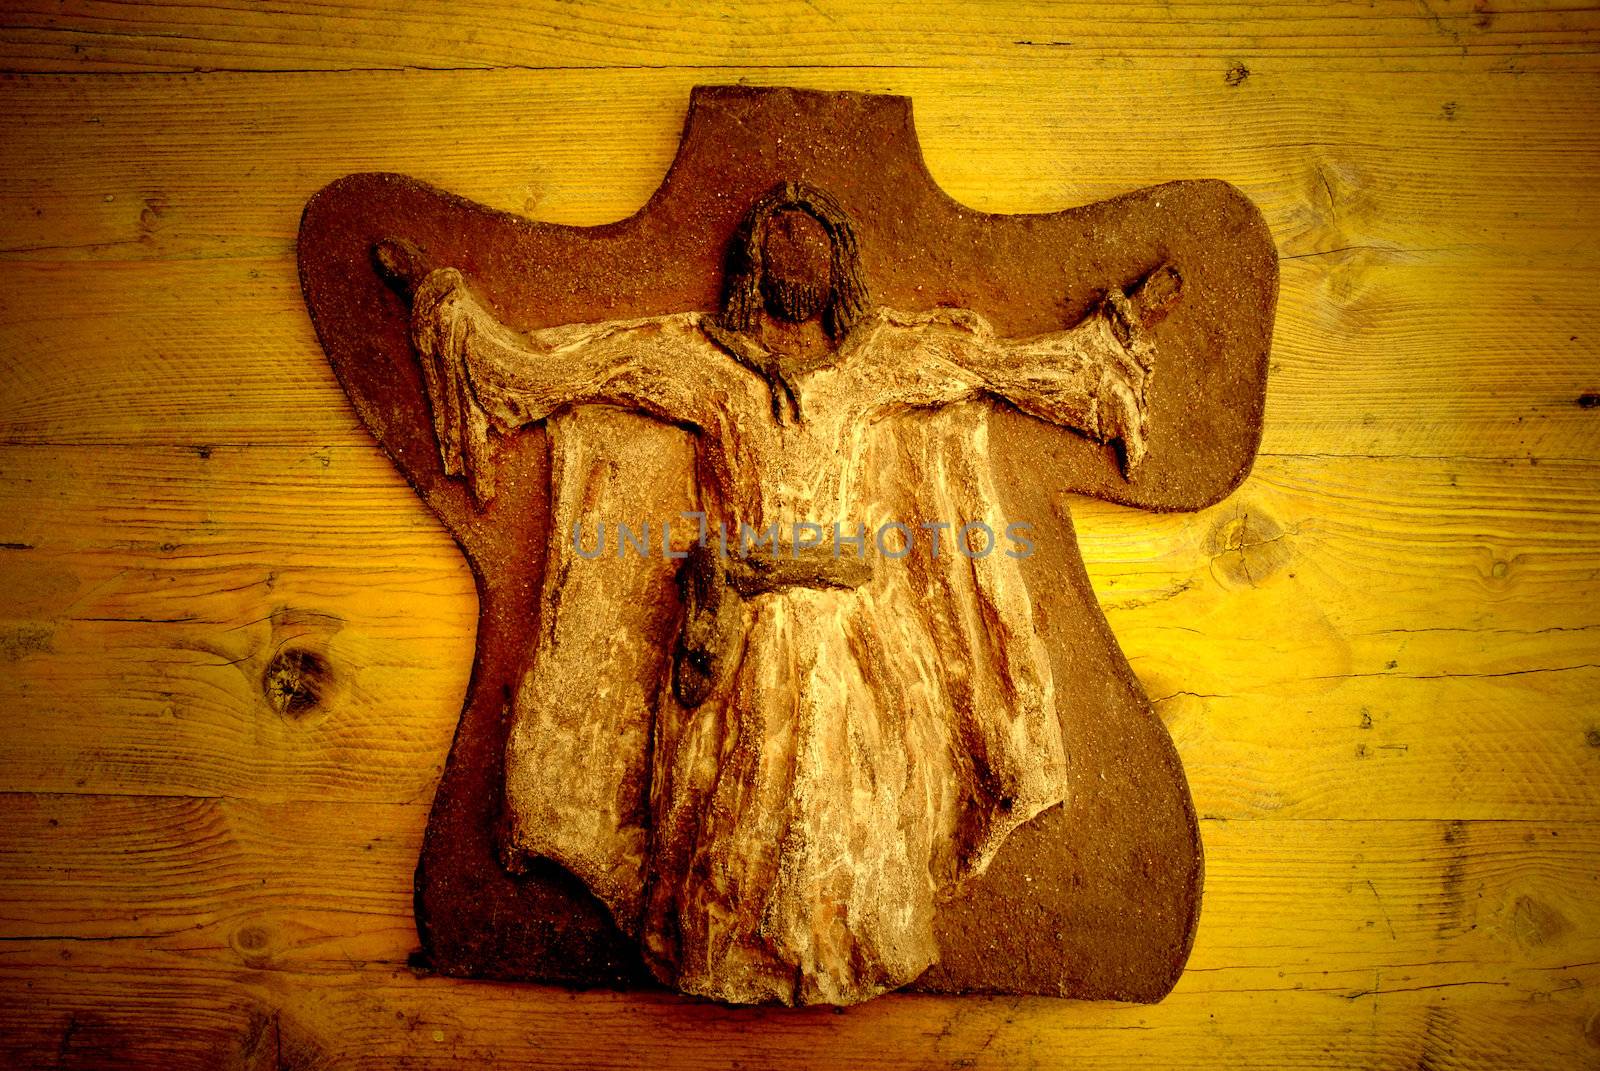 clay jesus card on wooden background